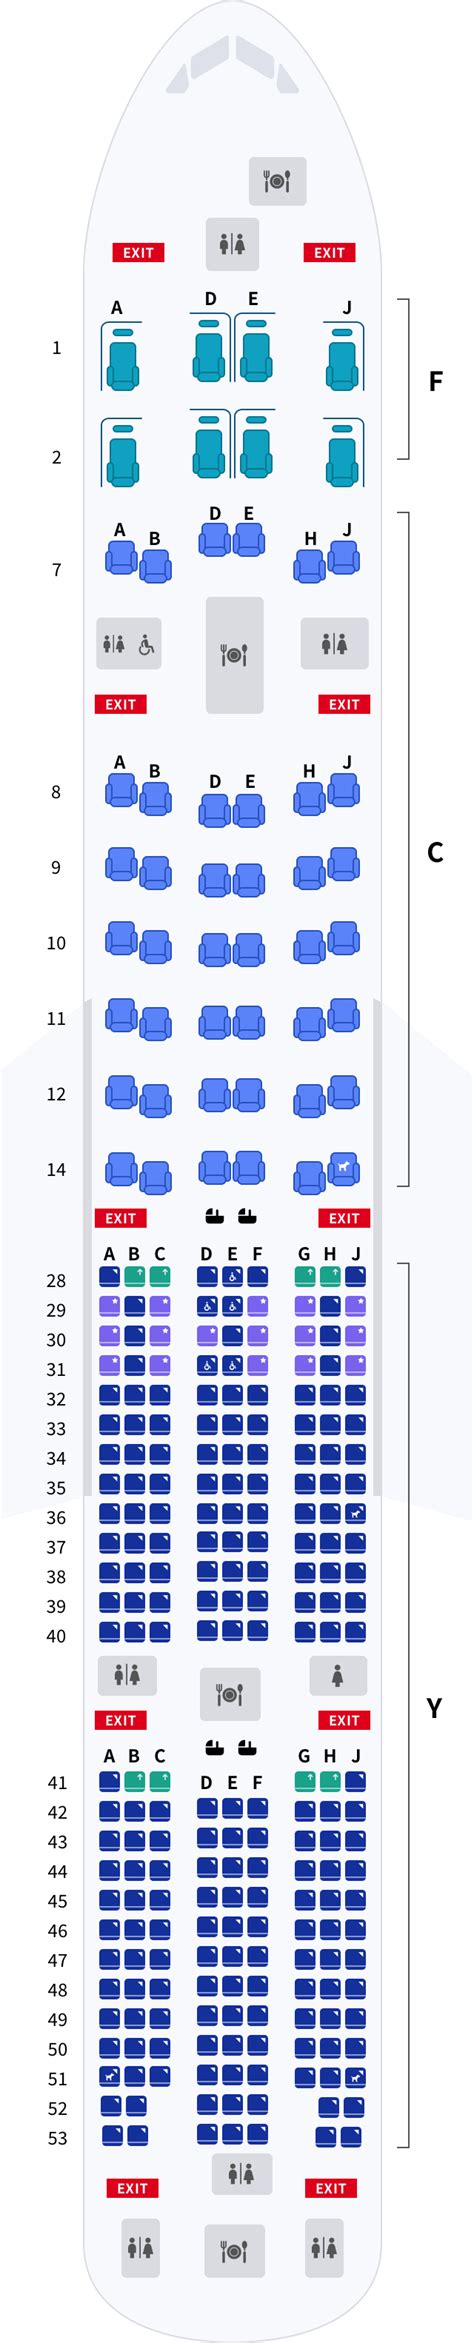 Seat Map And Seating Chart Korean Air Boeing 777 300er 291 Pax Boeing